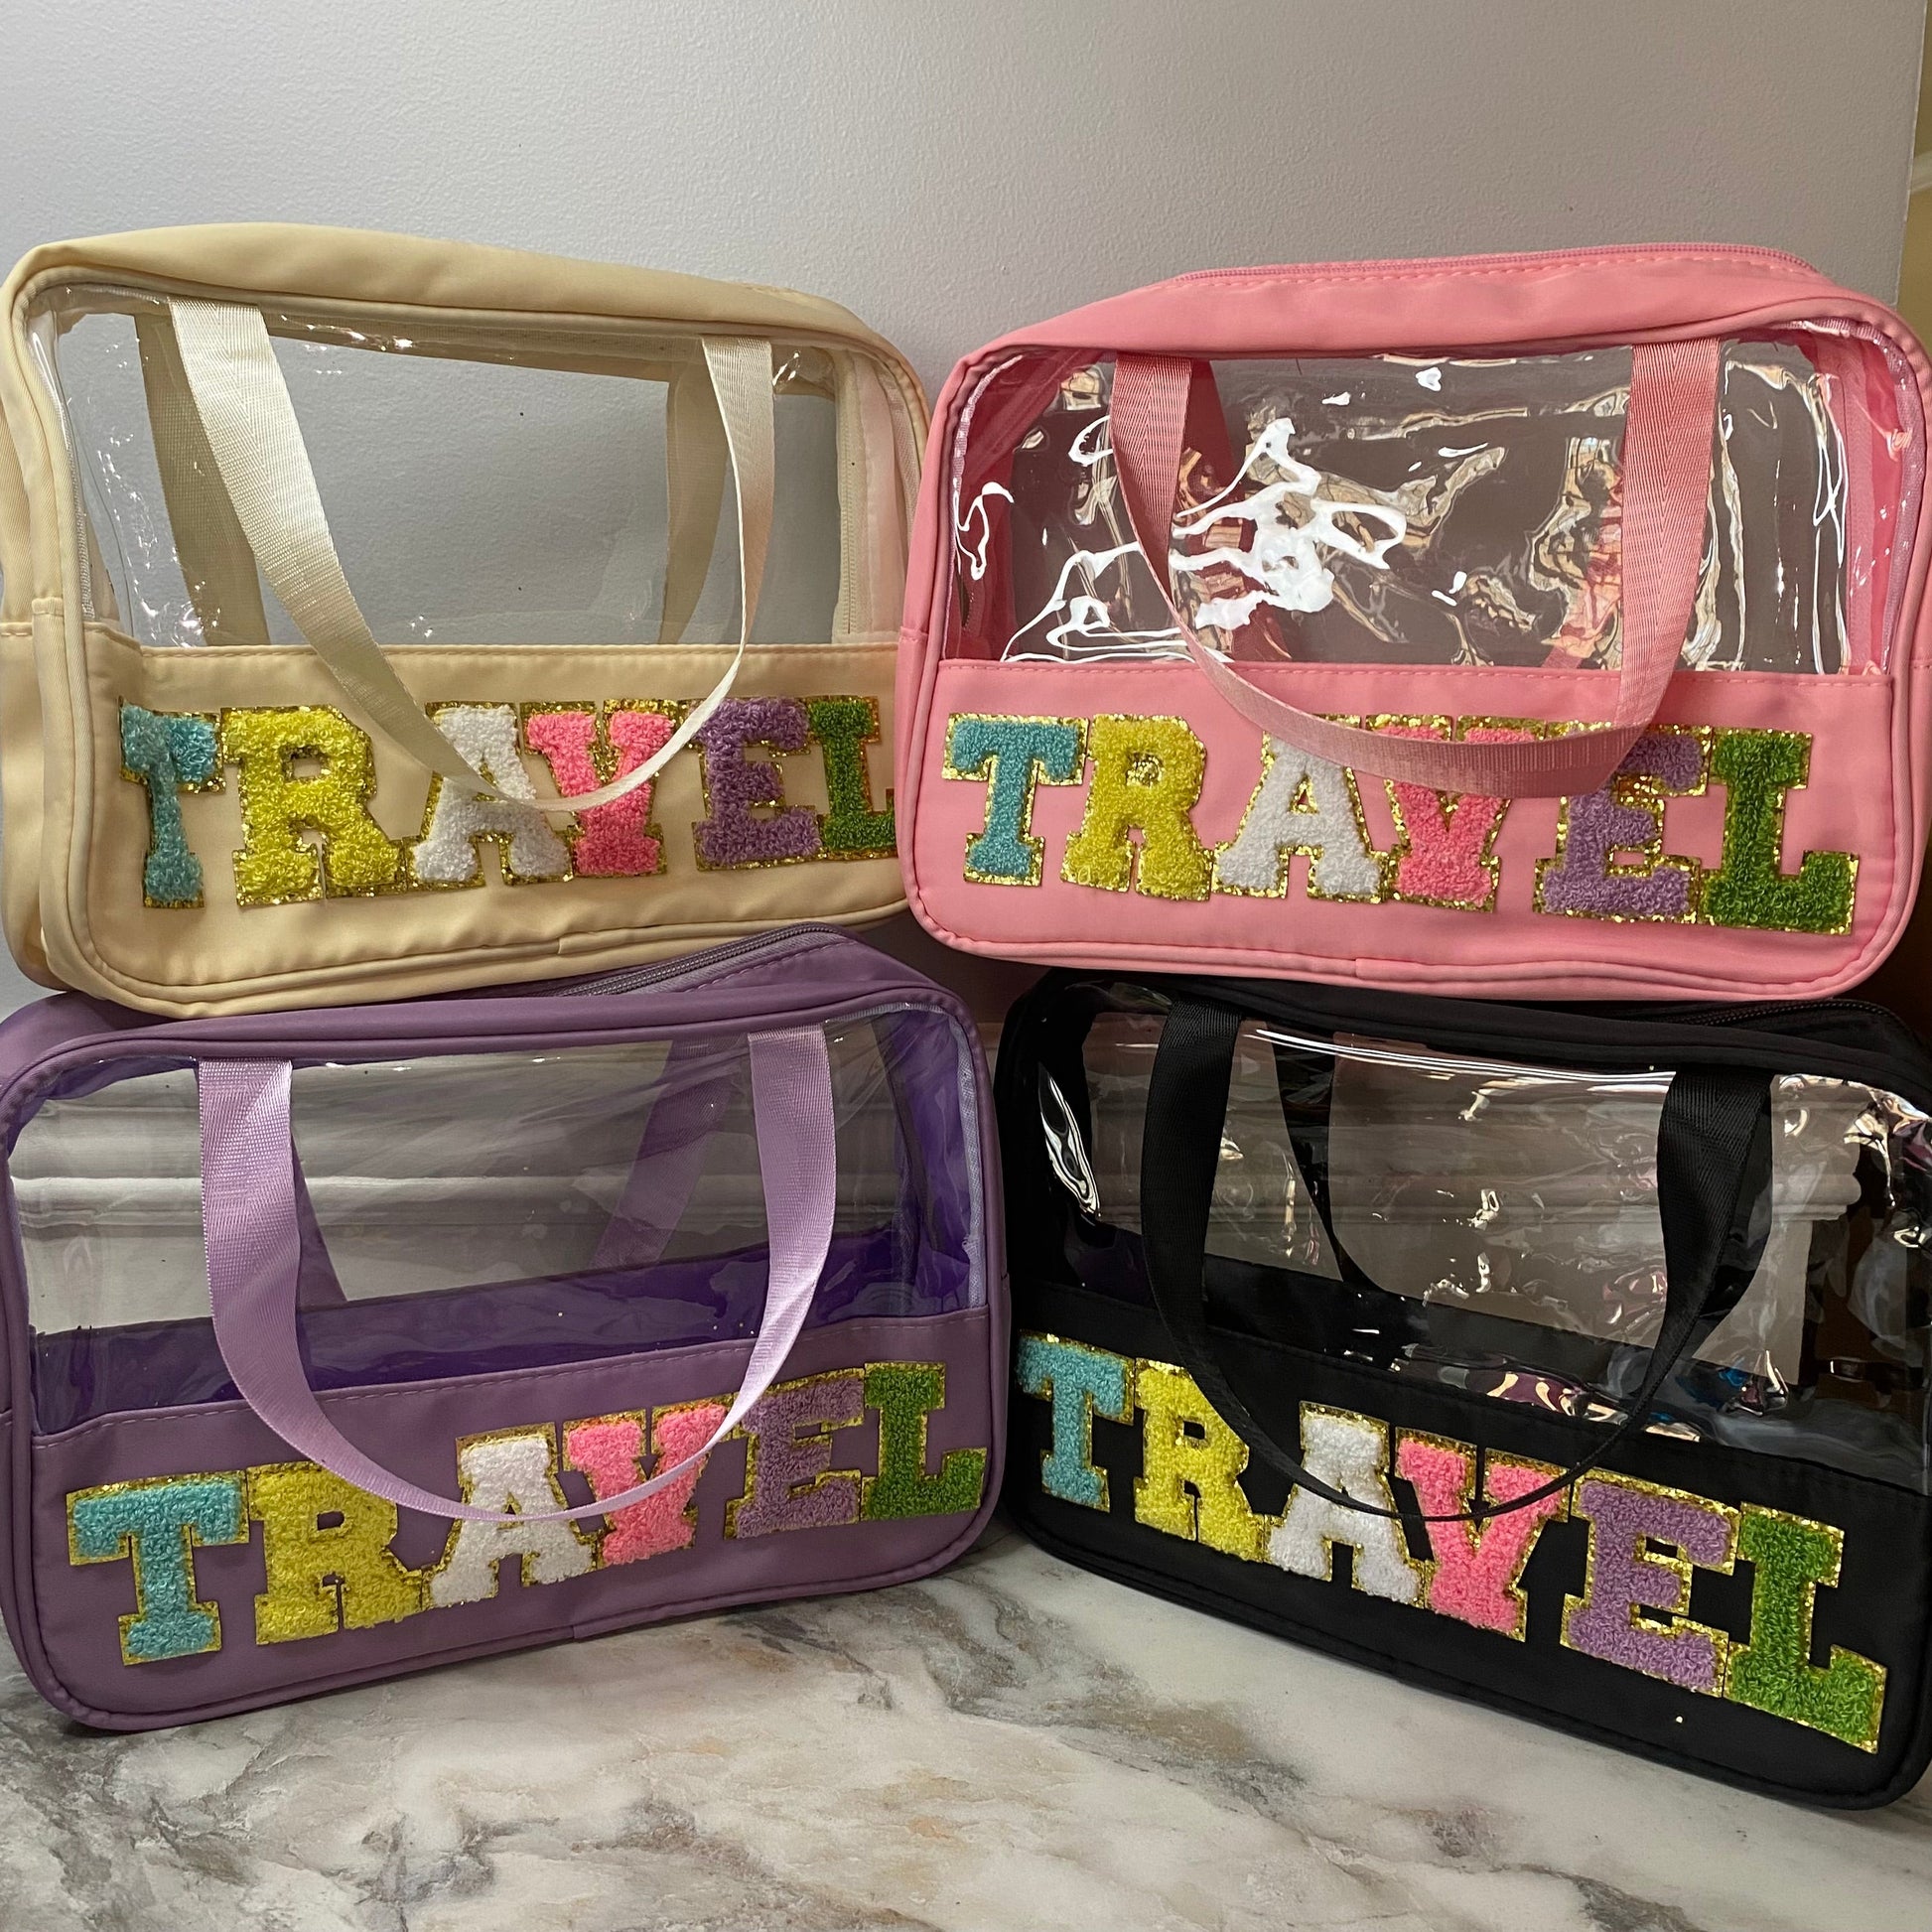 Clear Travel Case